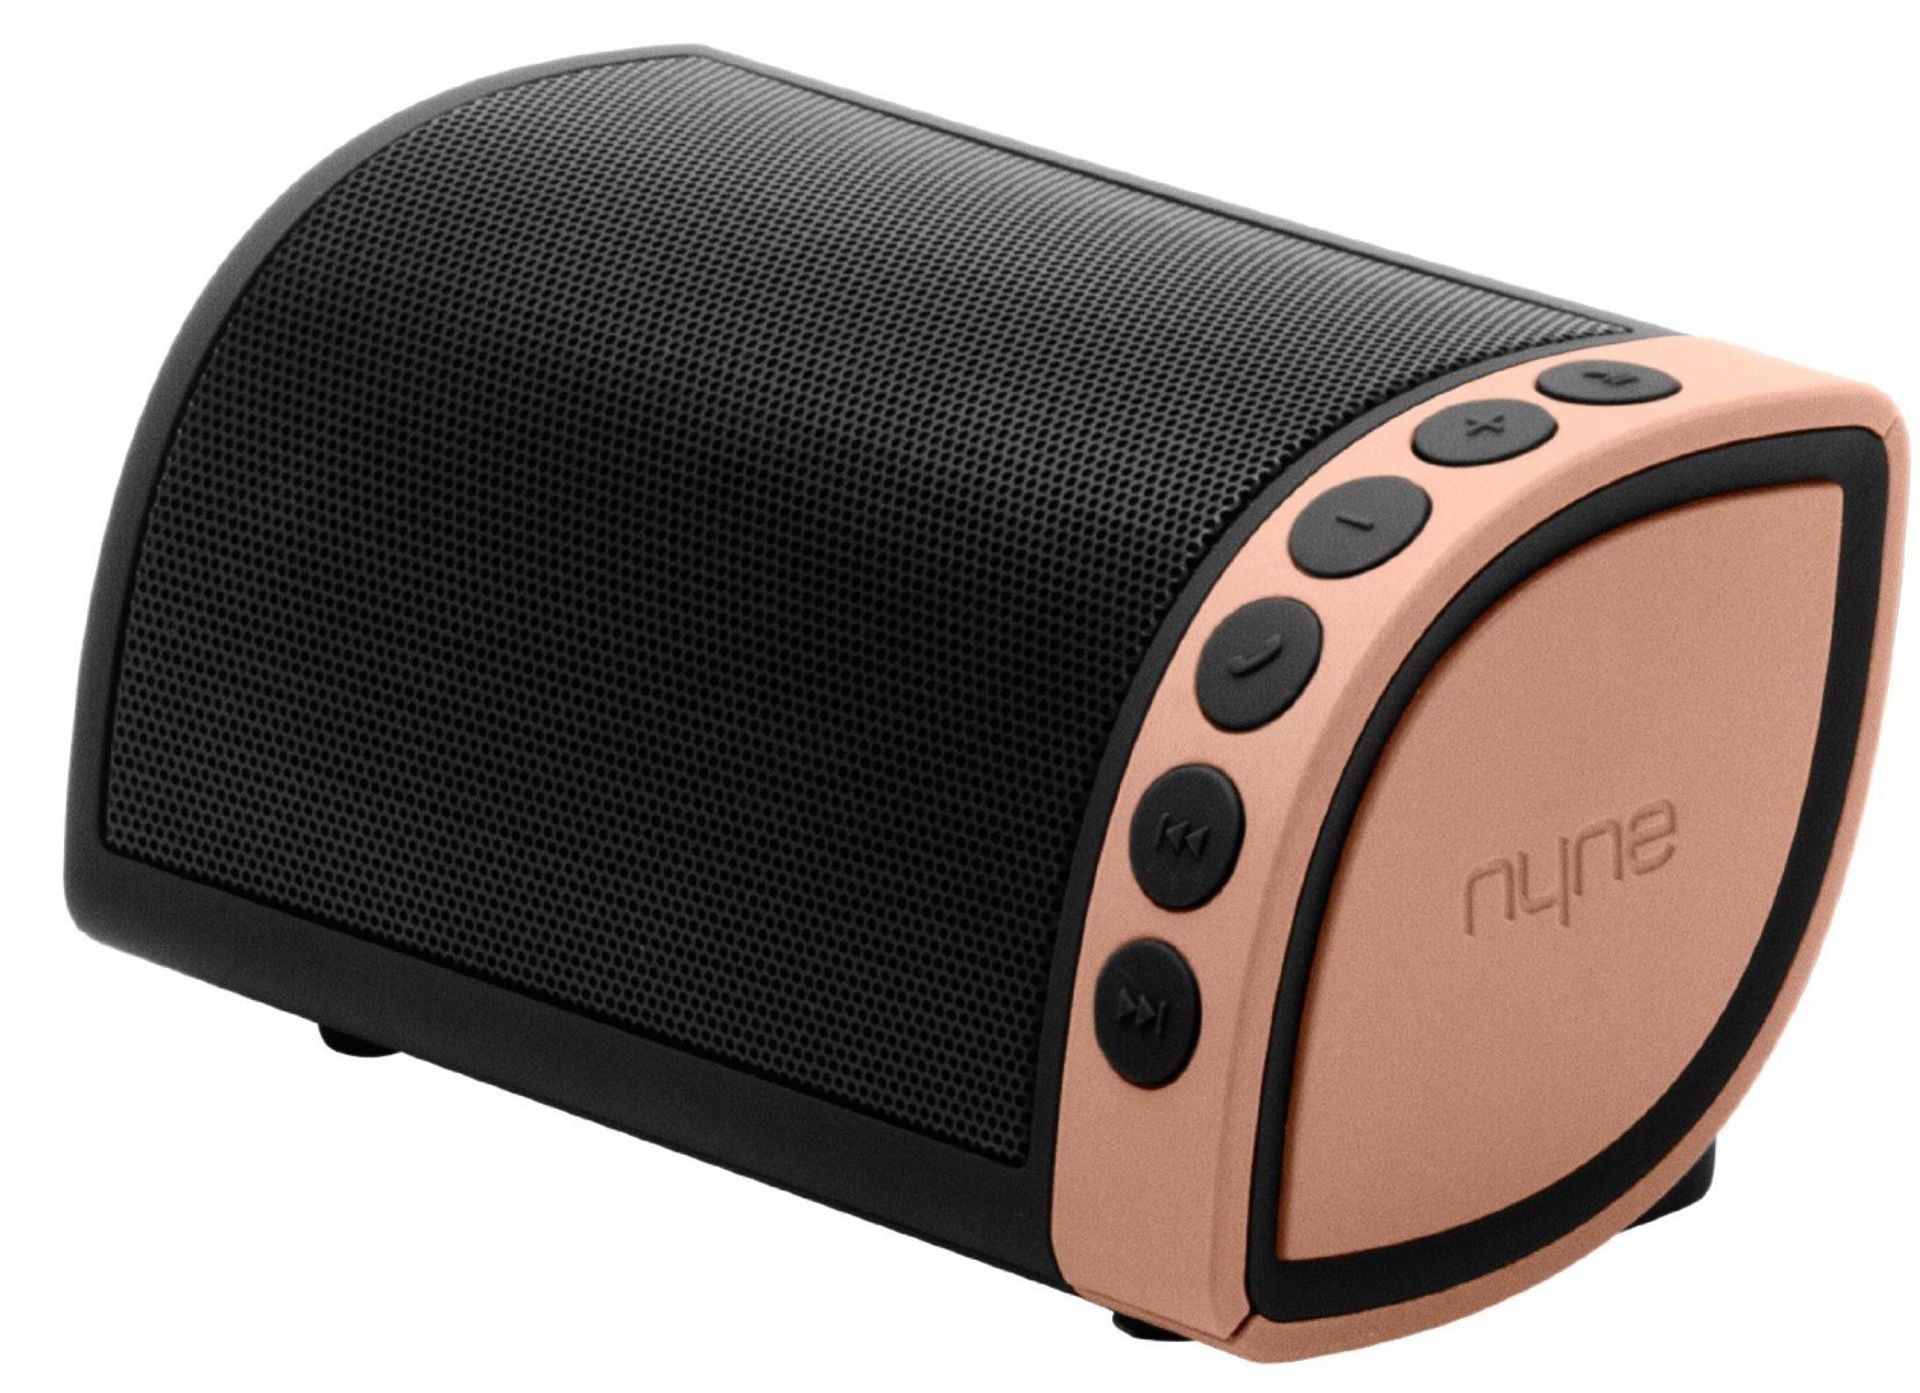 V *TRADE QTY* Brand New Nyne Cruiser Universal Rechargeable Rugged Portbale Bluetooth Wireless